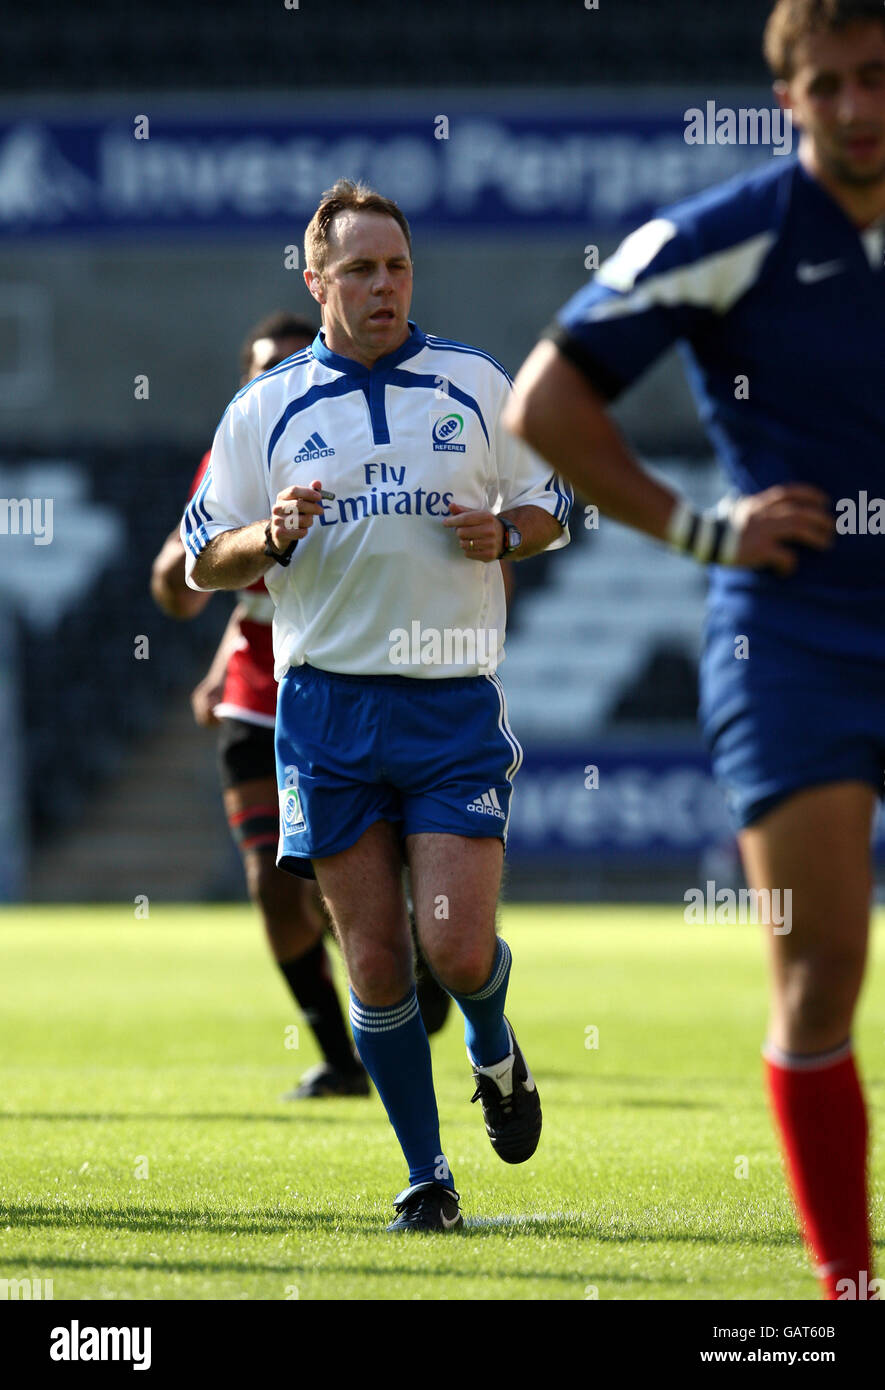 Referee Andrew Small during the Invesco Perpetual Junior Rugby World Cup match at Liberty Stadium, Swansea. Stock Photo